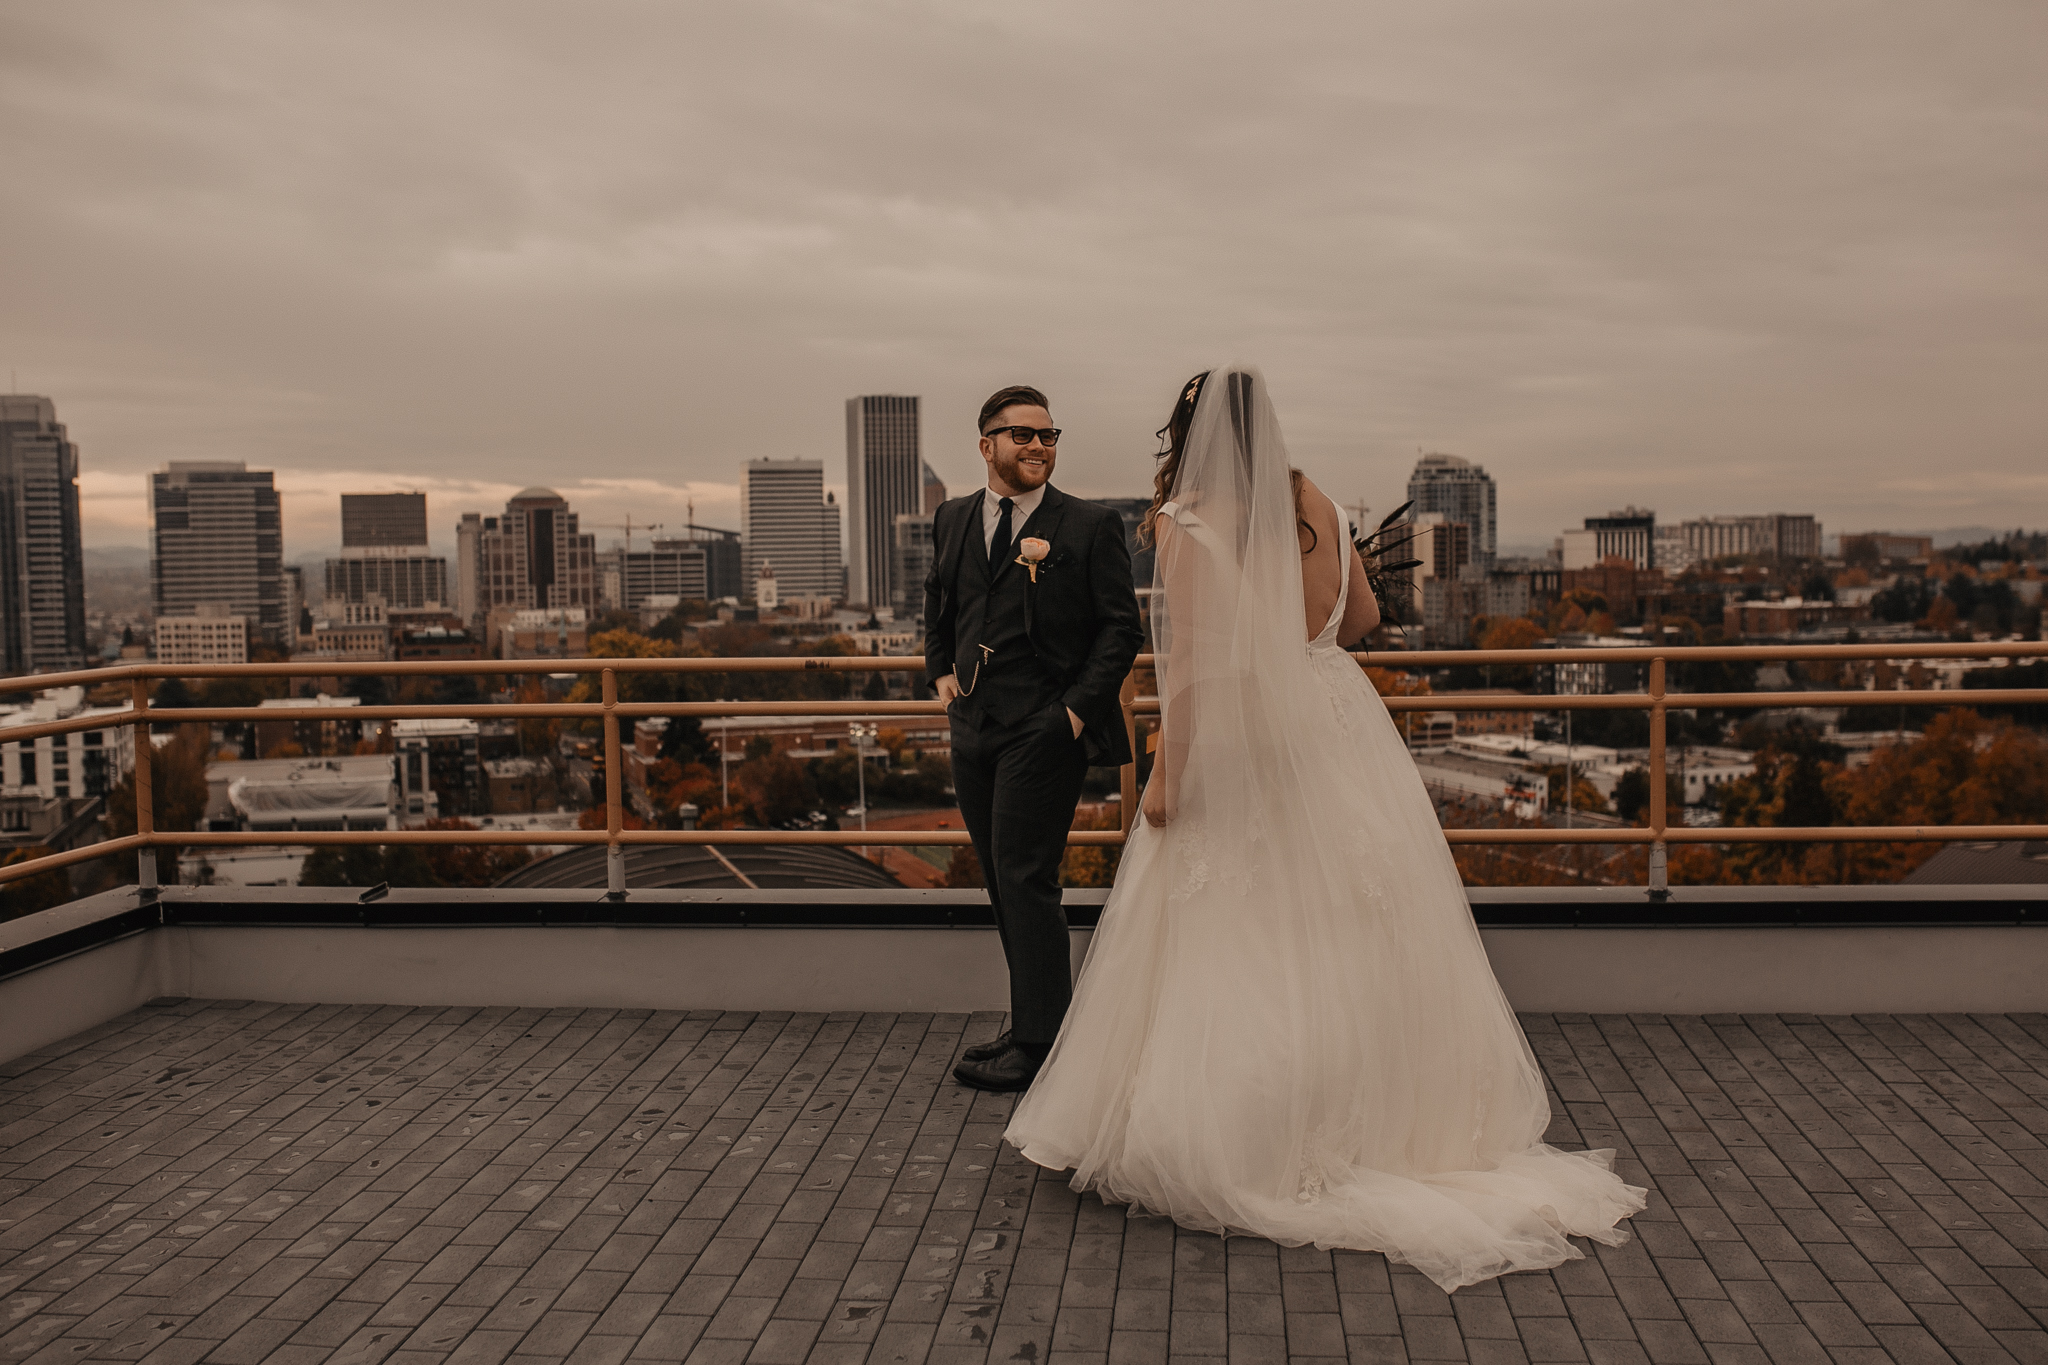  downtown portland rooftop first look on wedding day 